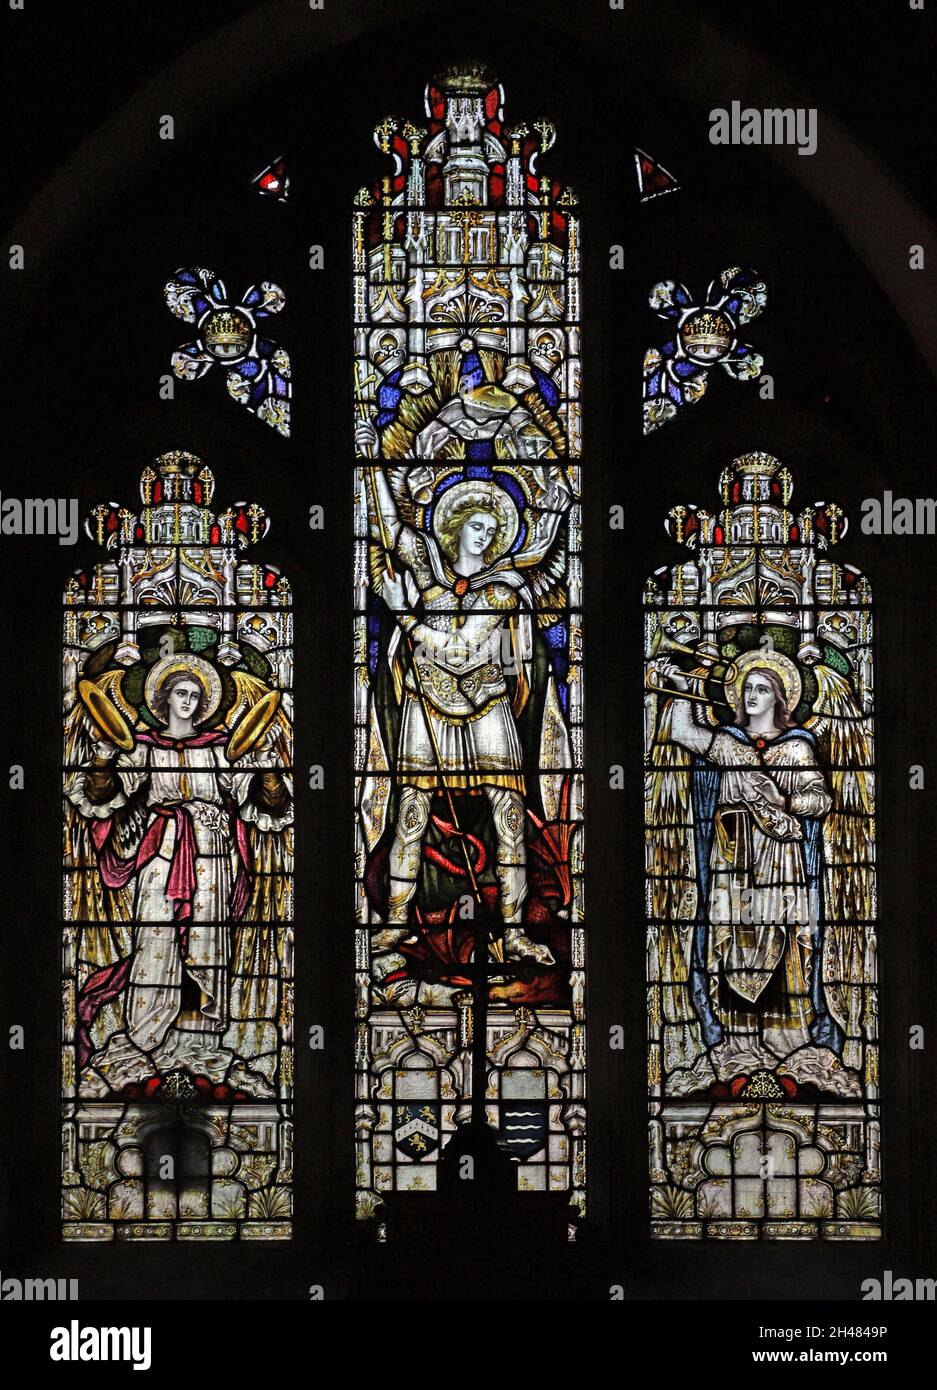 A stained glass window by Herbert Davis depicting Archangel Michael slaying the dragon, St Michael & All Angels Church, Fringford, Oxfordshire Stock Photo